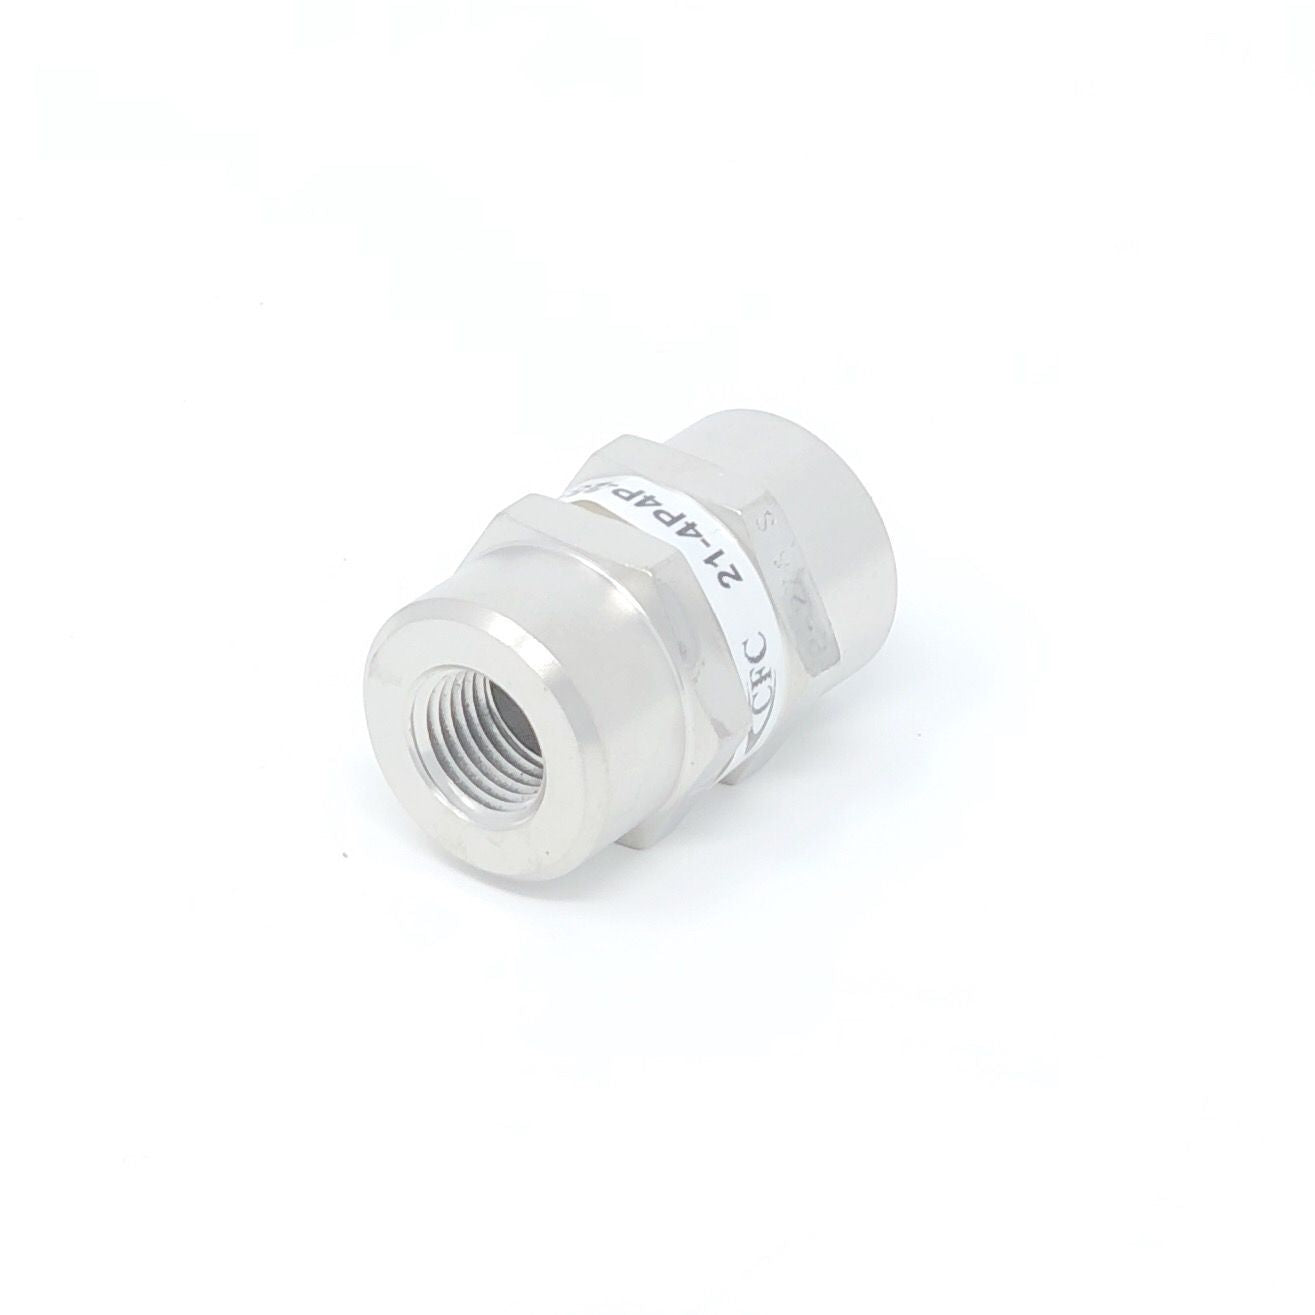 21-8S8S-18S : Chase High Pressure Inline Filter, 3000psi, #8 SAE (1/2"), 18 Micron, No Visual Indicator, With Bypass